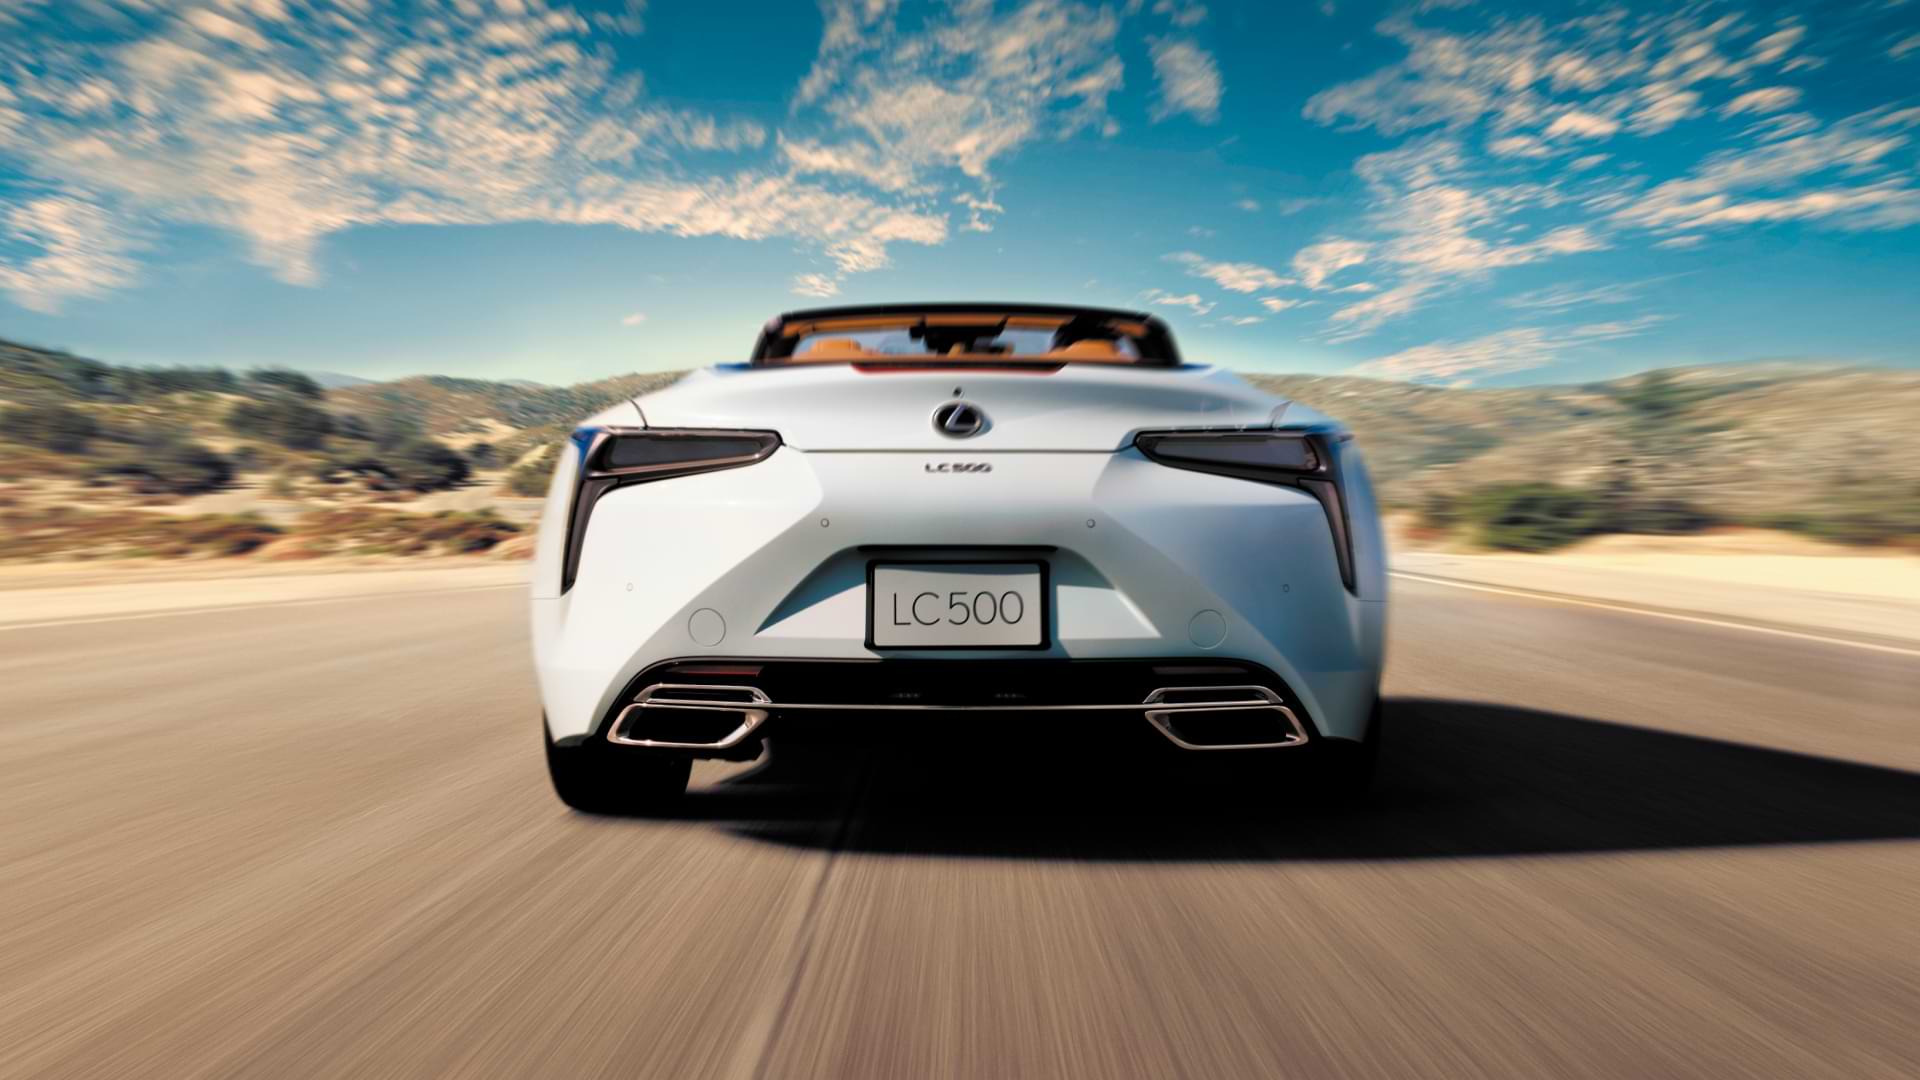 LC 500 Convertible in White Nova shown from rear